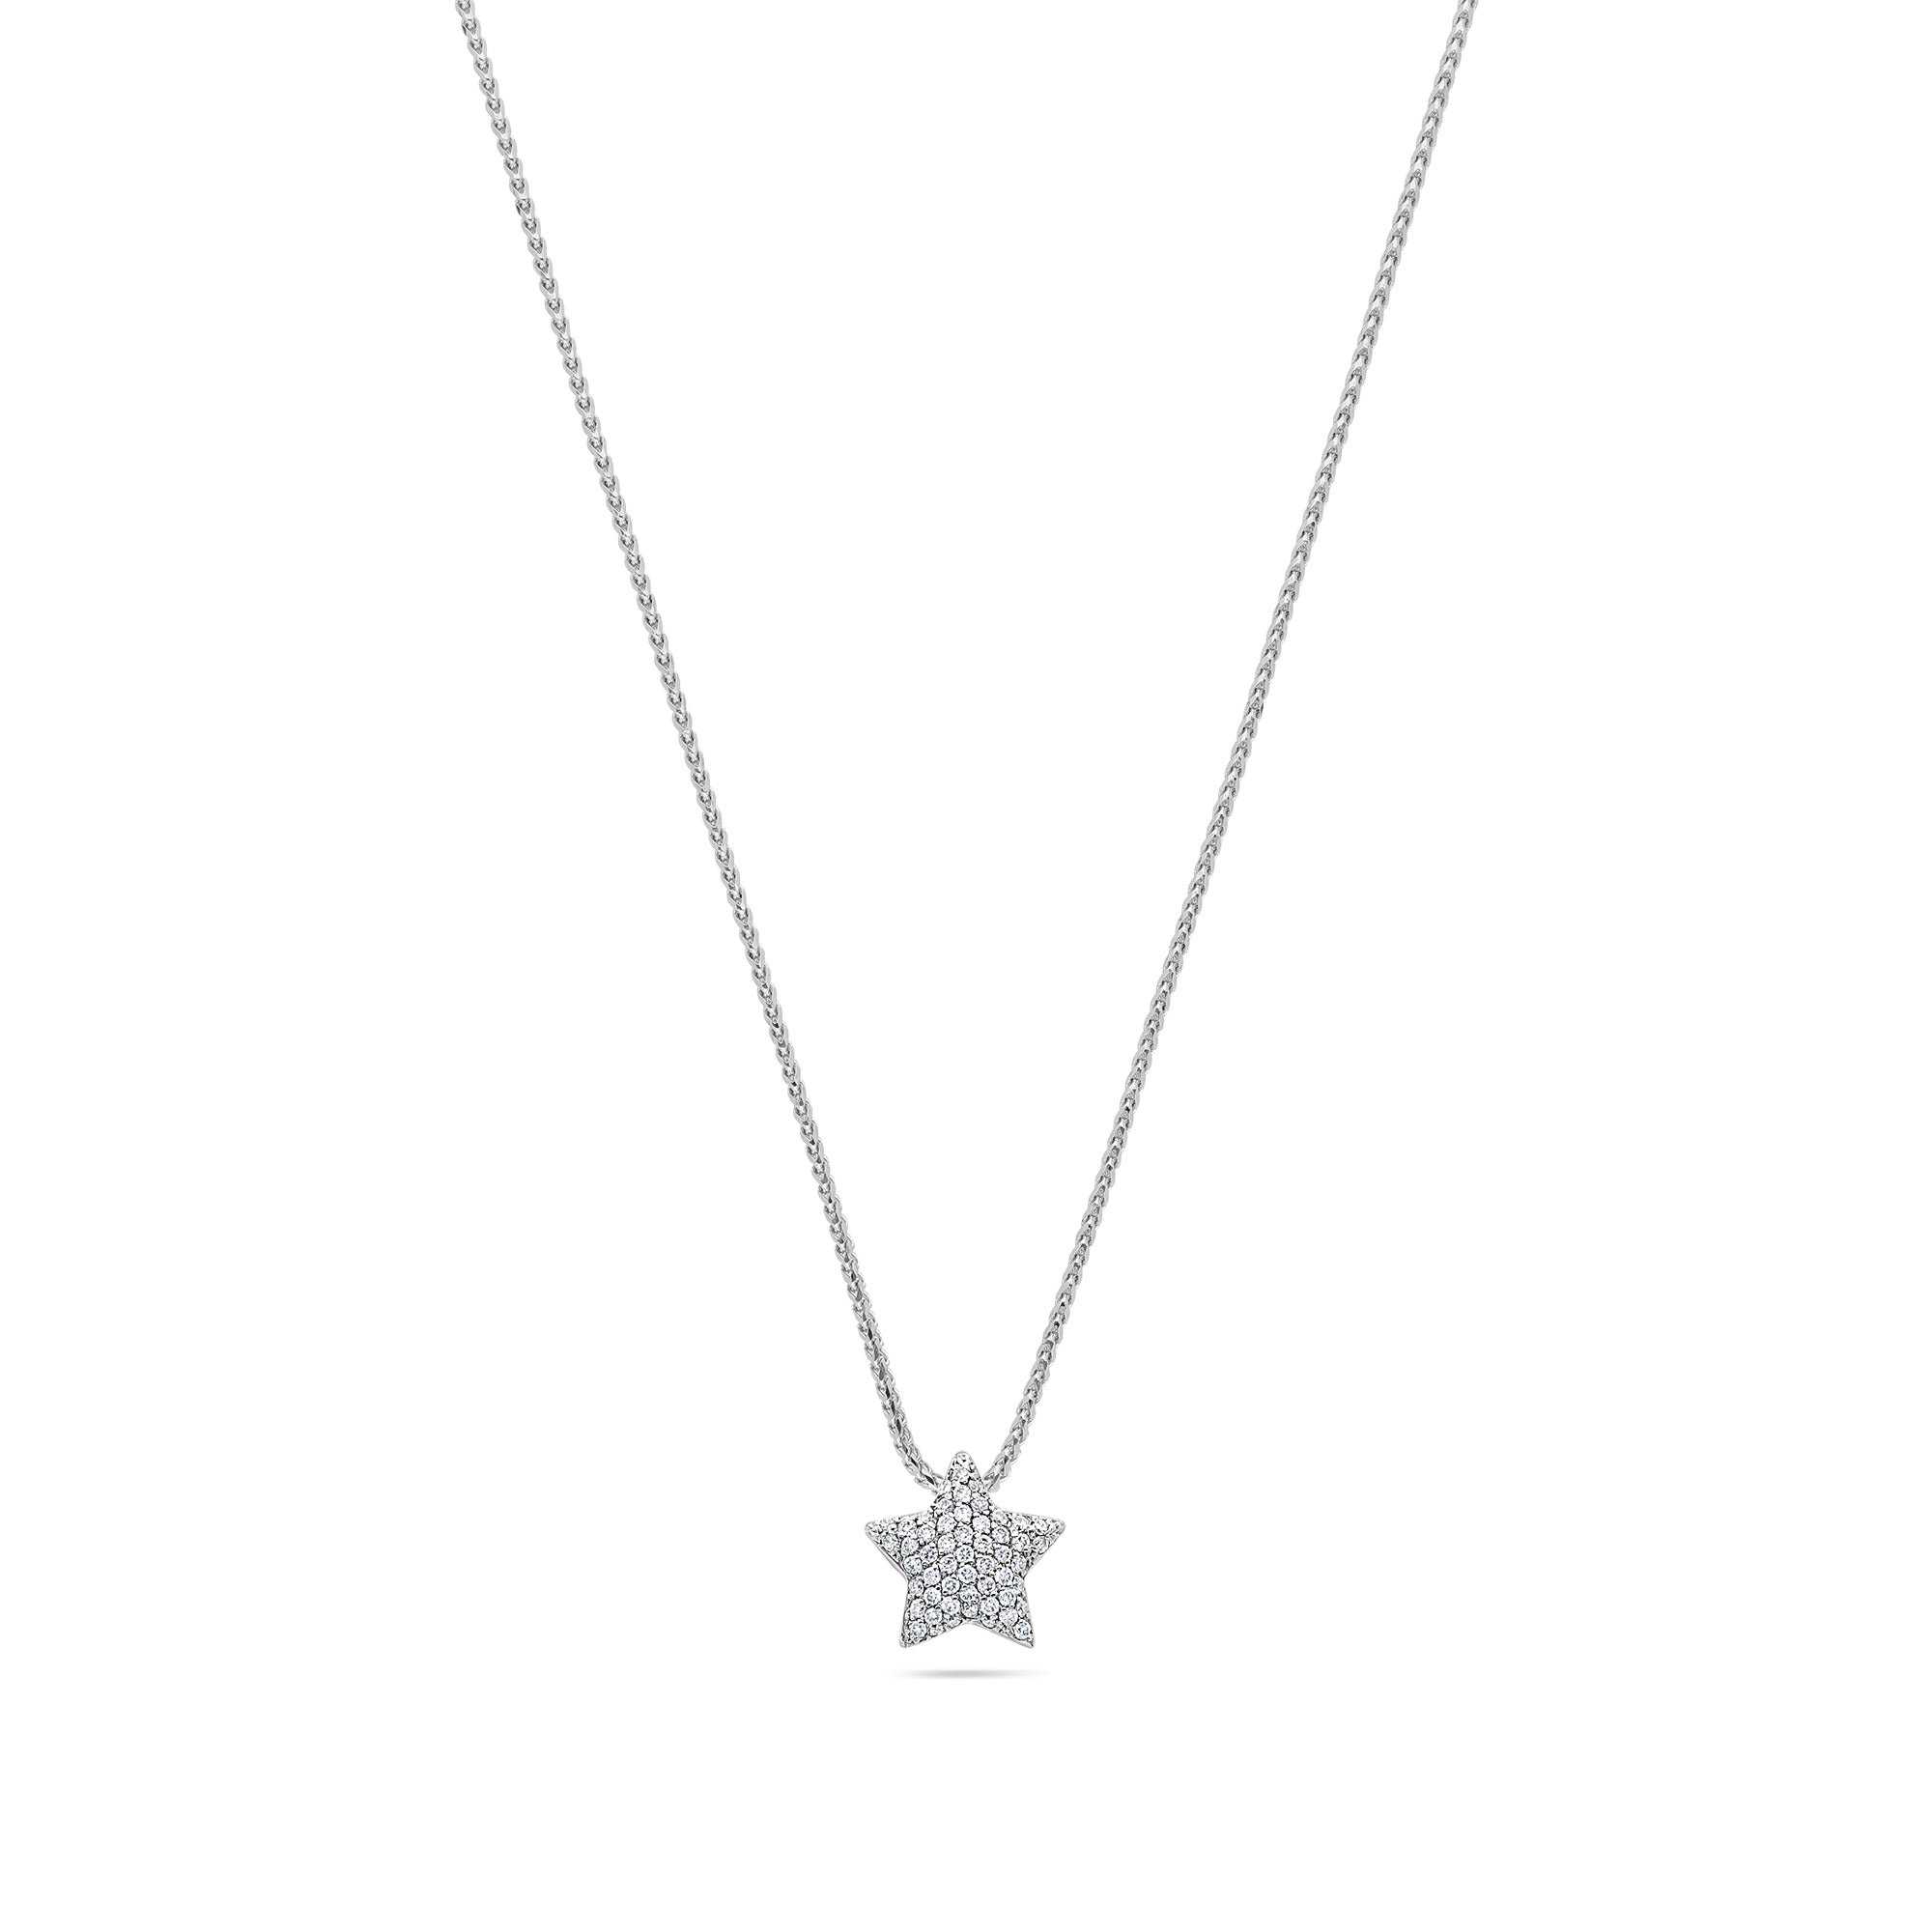 Center Diamond Star of David Necklace in 14k Yellow Gold or White Gold